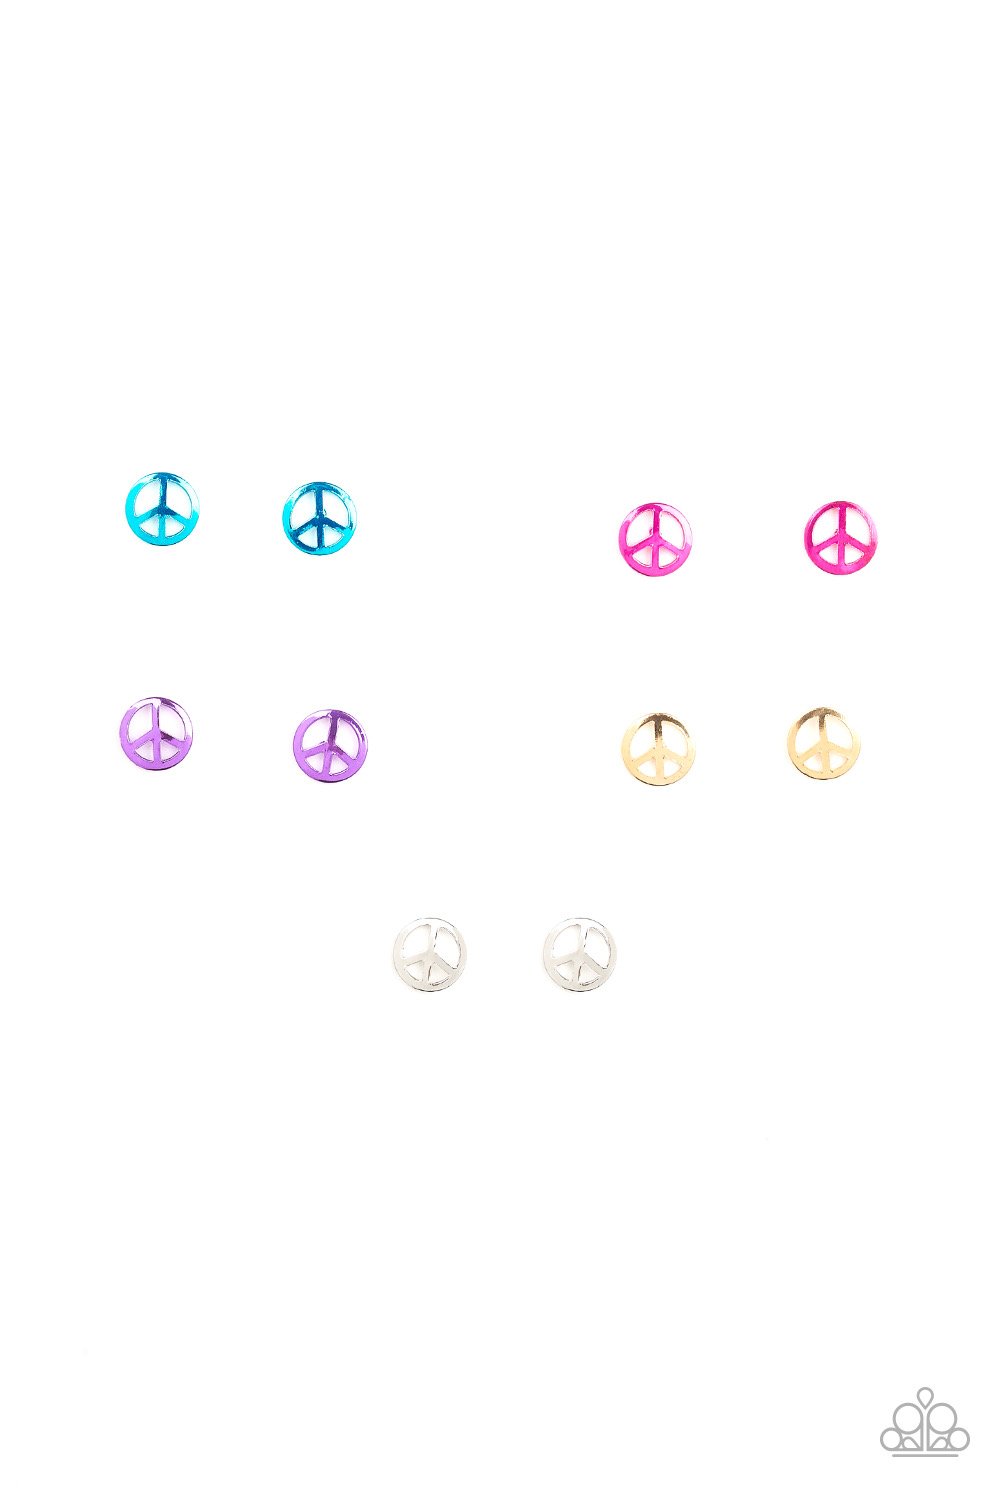 WORLD PEACE - ASSORTED SET OF 5 PAIRS OF EARRINGS